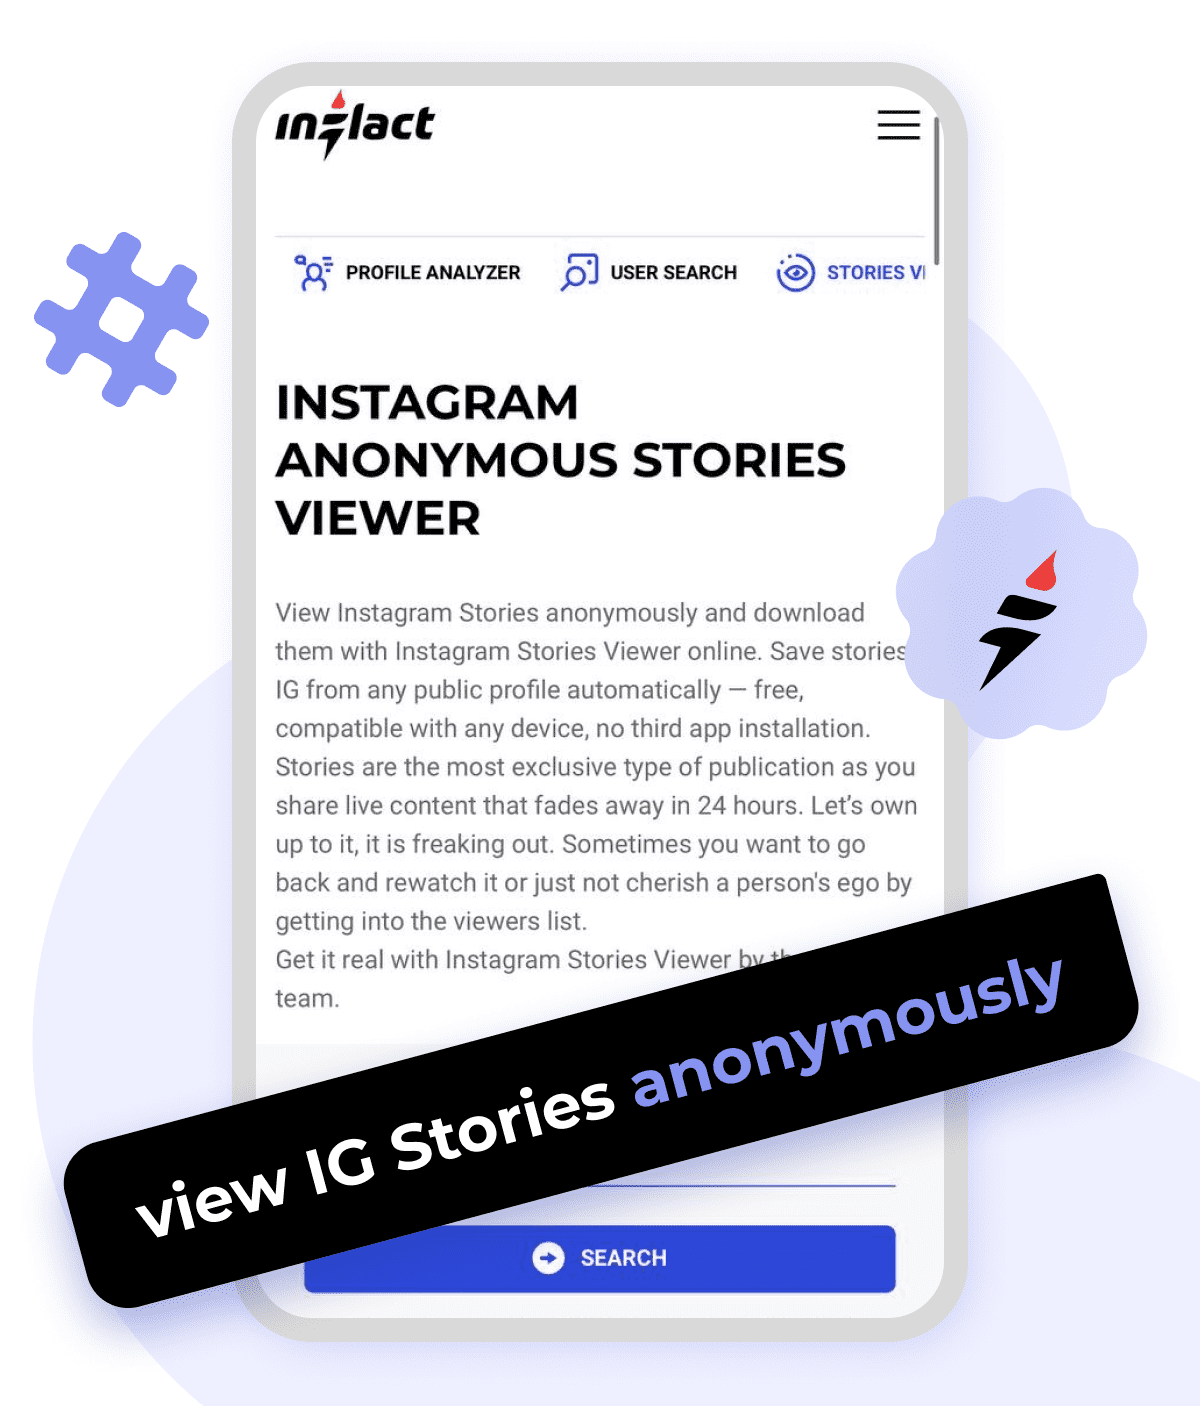 how to view all Insta stories anonymously